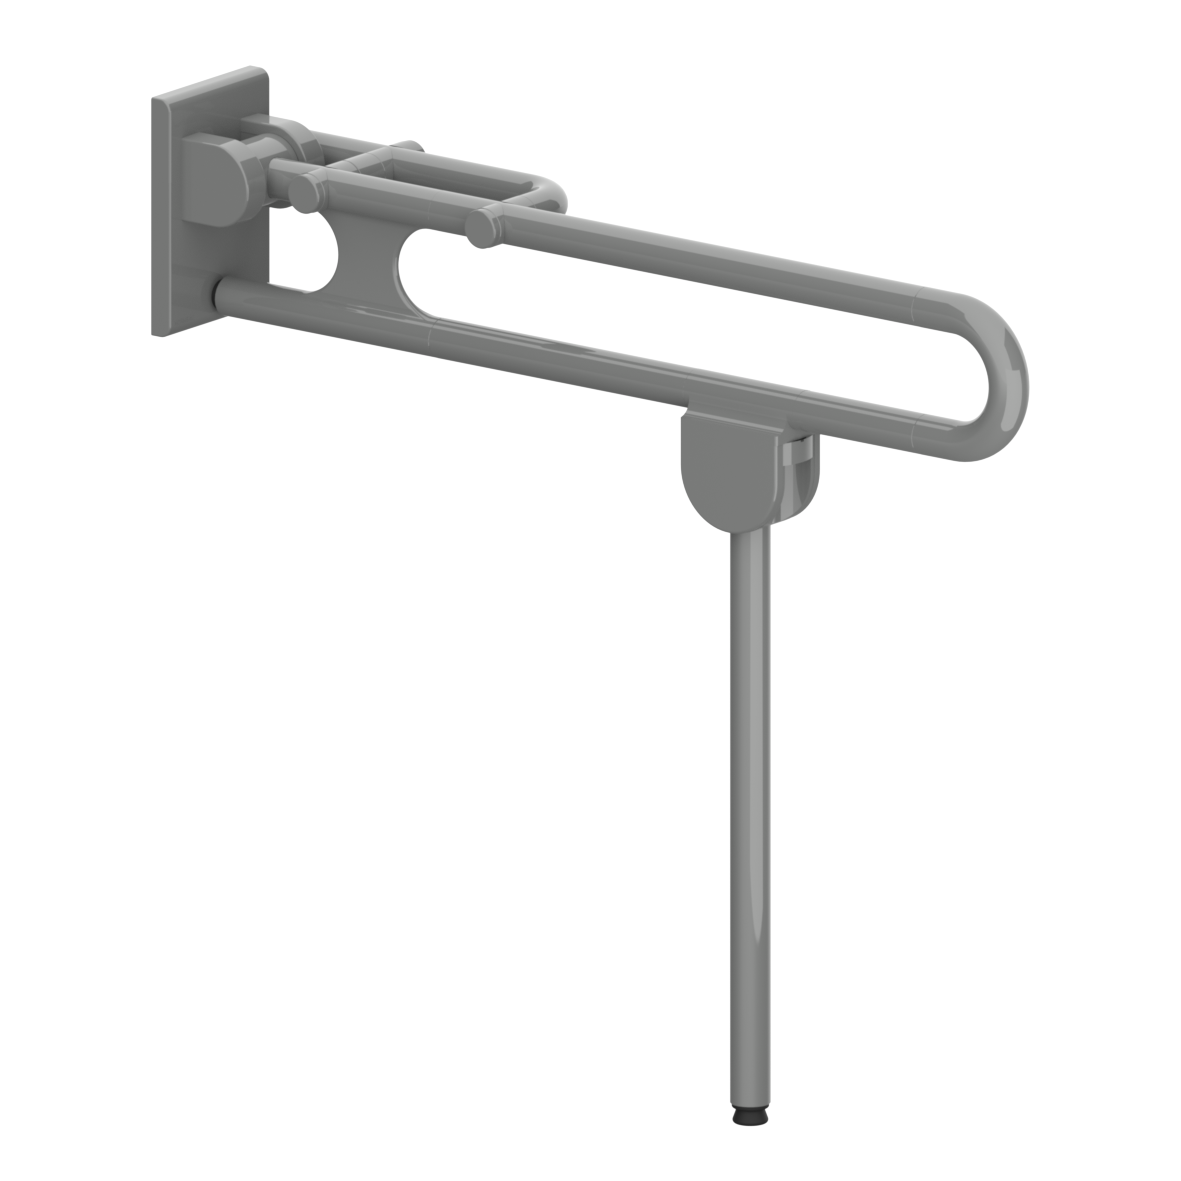 Special Care Adipositas Lift-up support rail, with floor support (750 mm), right, L = 850 mm, Dark grey